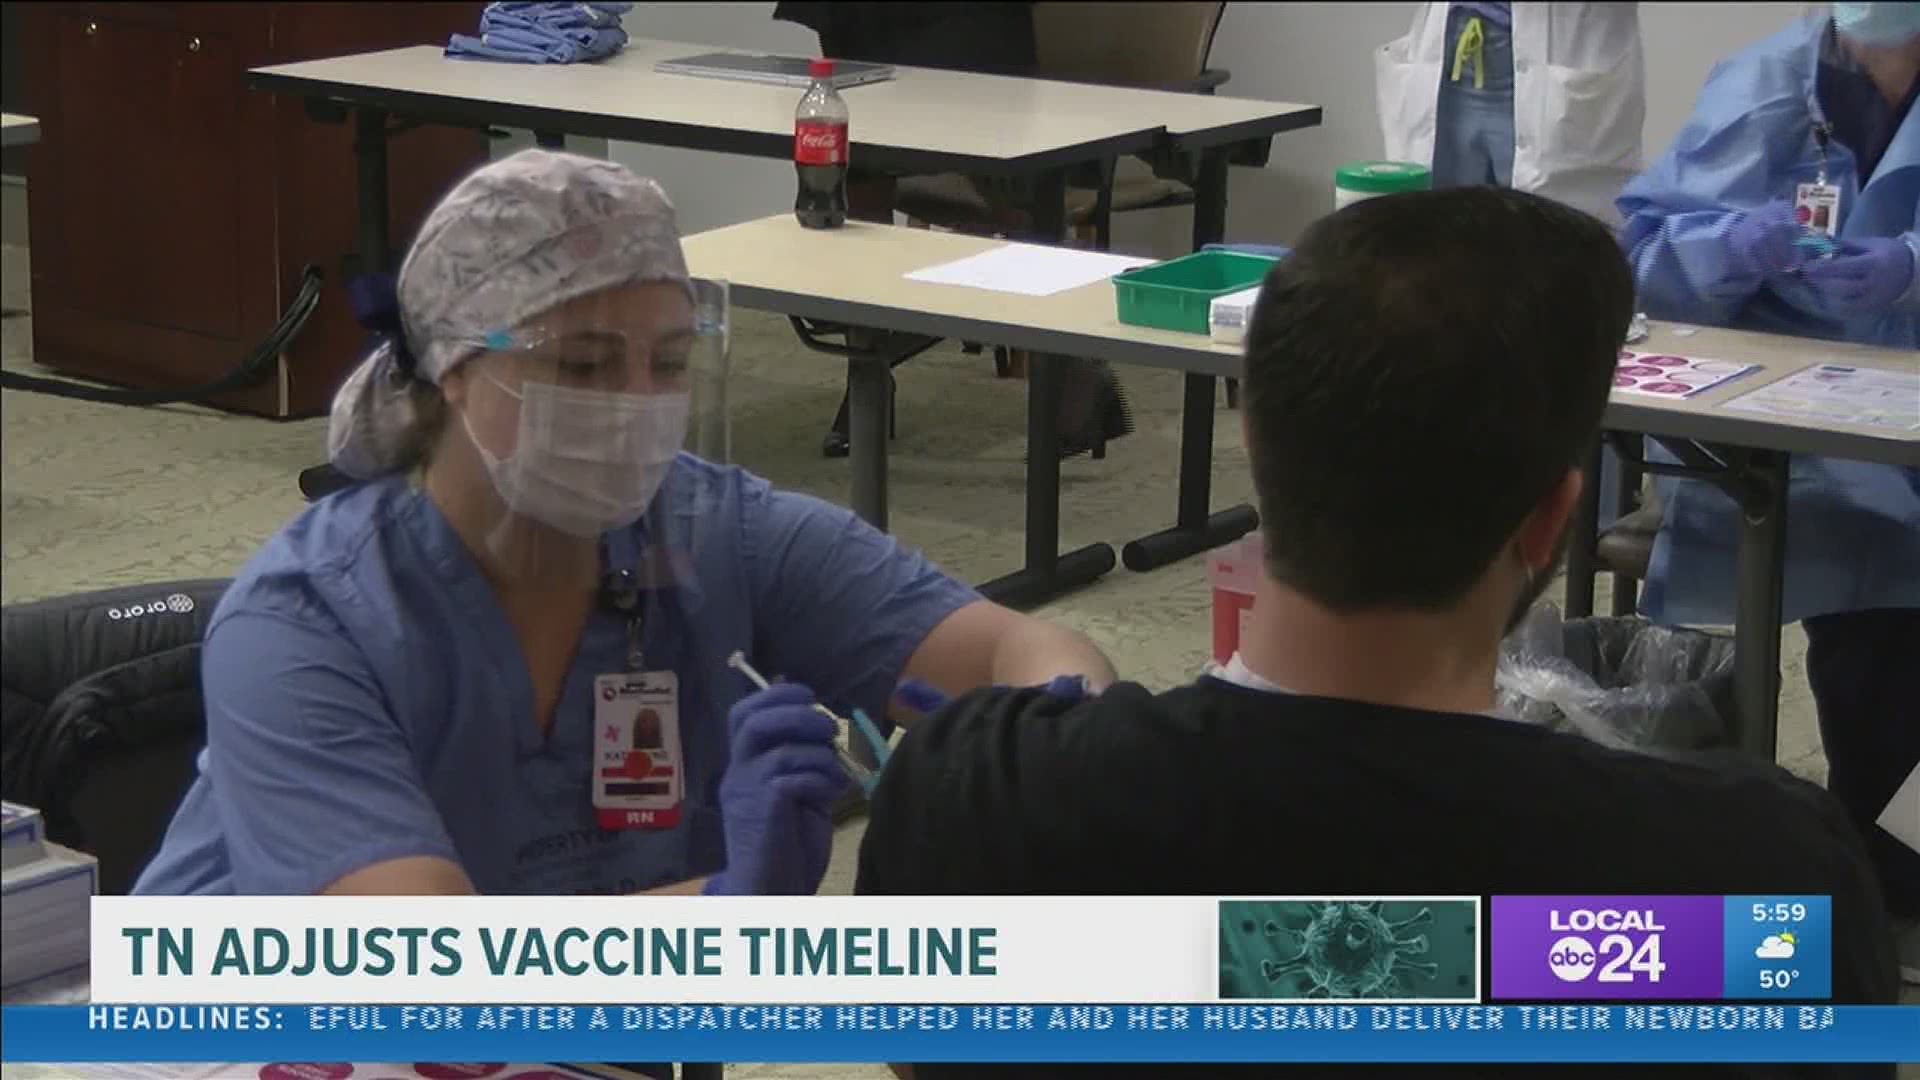 The state is adjusting its vaccine distribution plan and timeline due to limited availability, and to reprioritize some of those at risk.